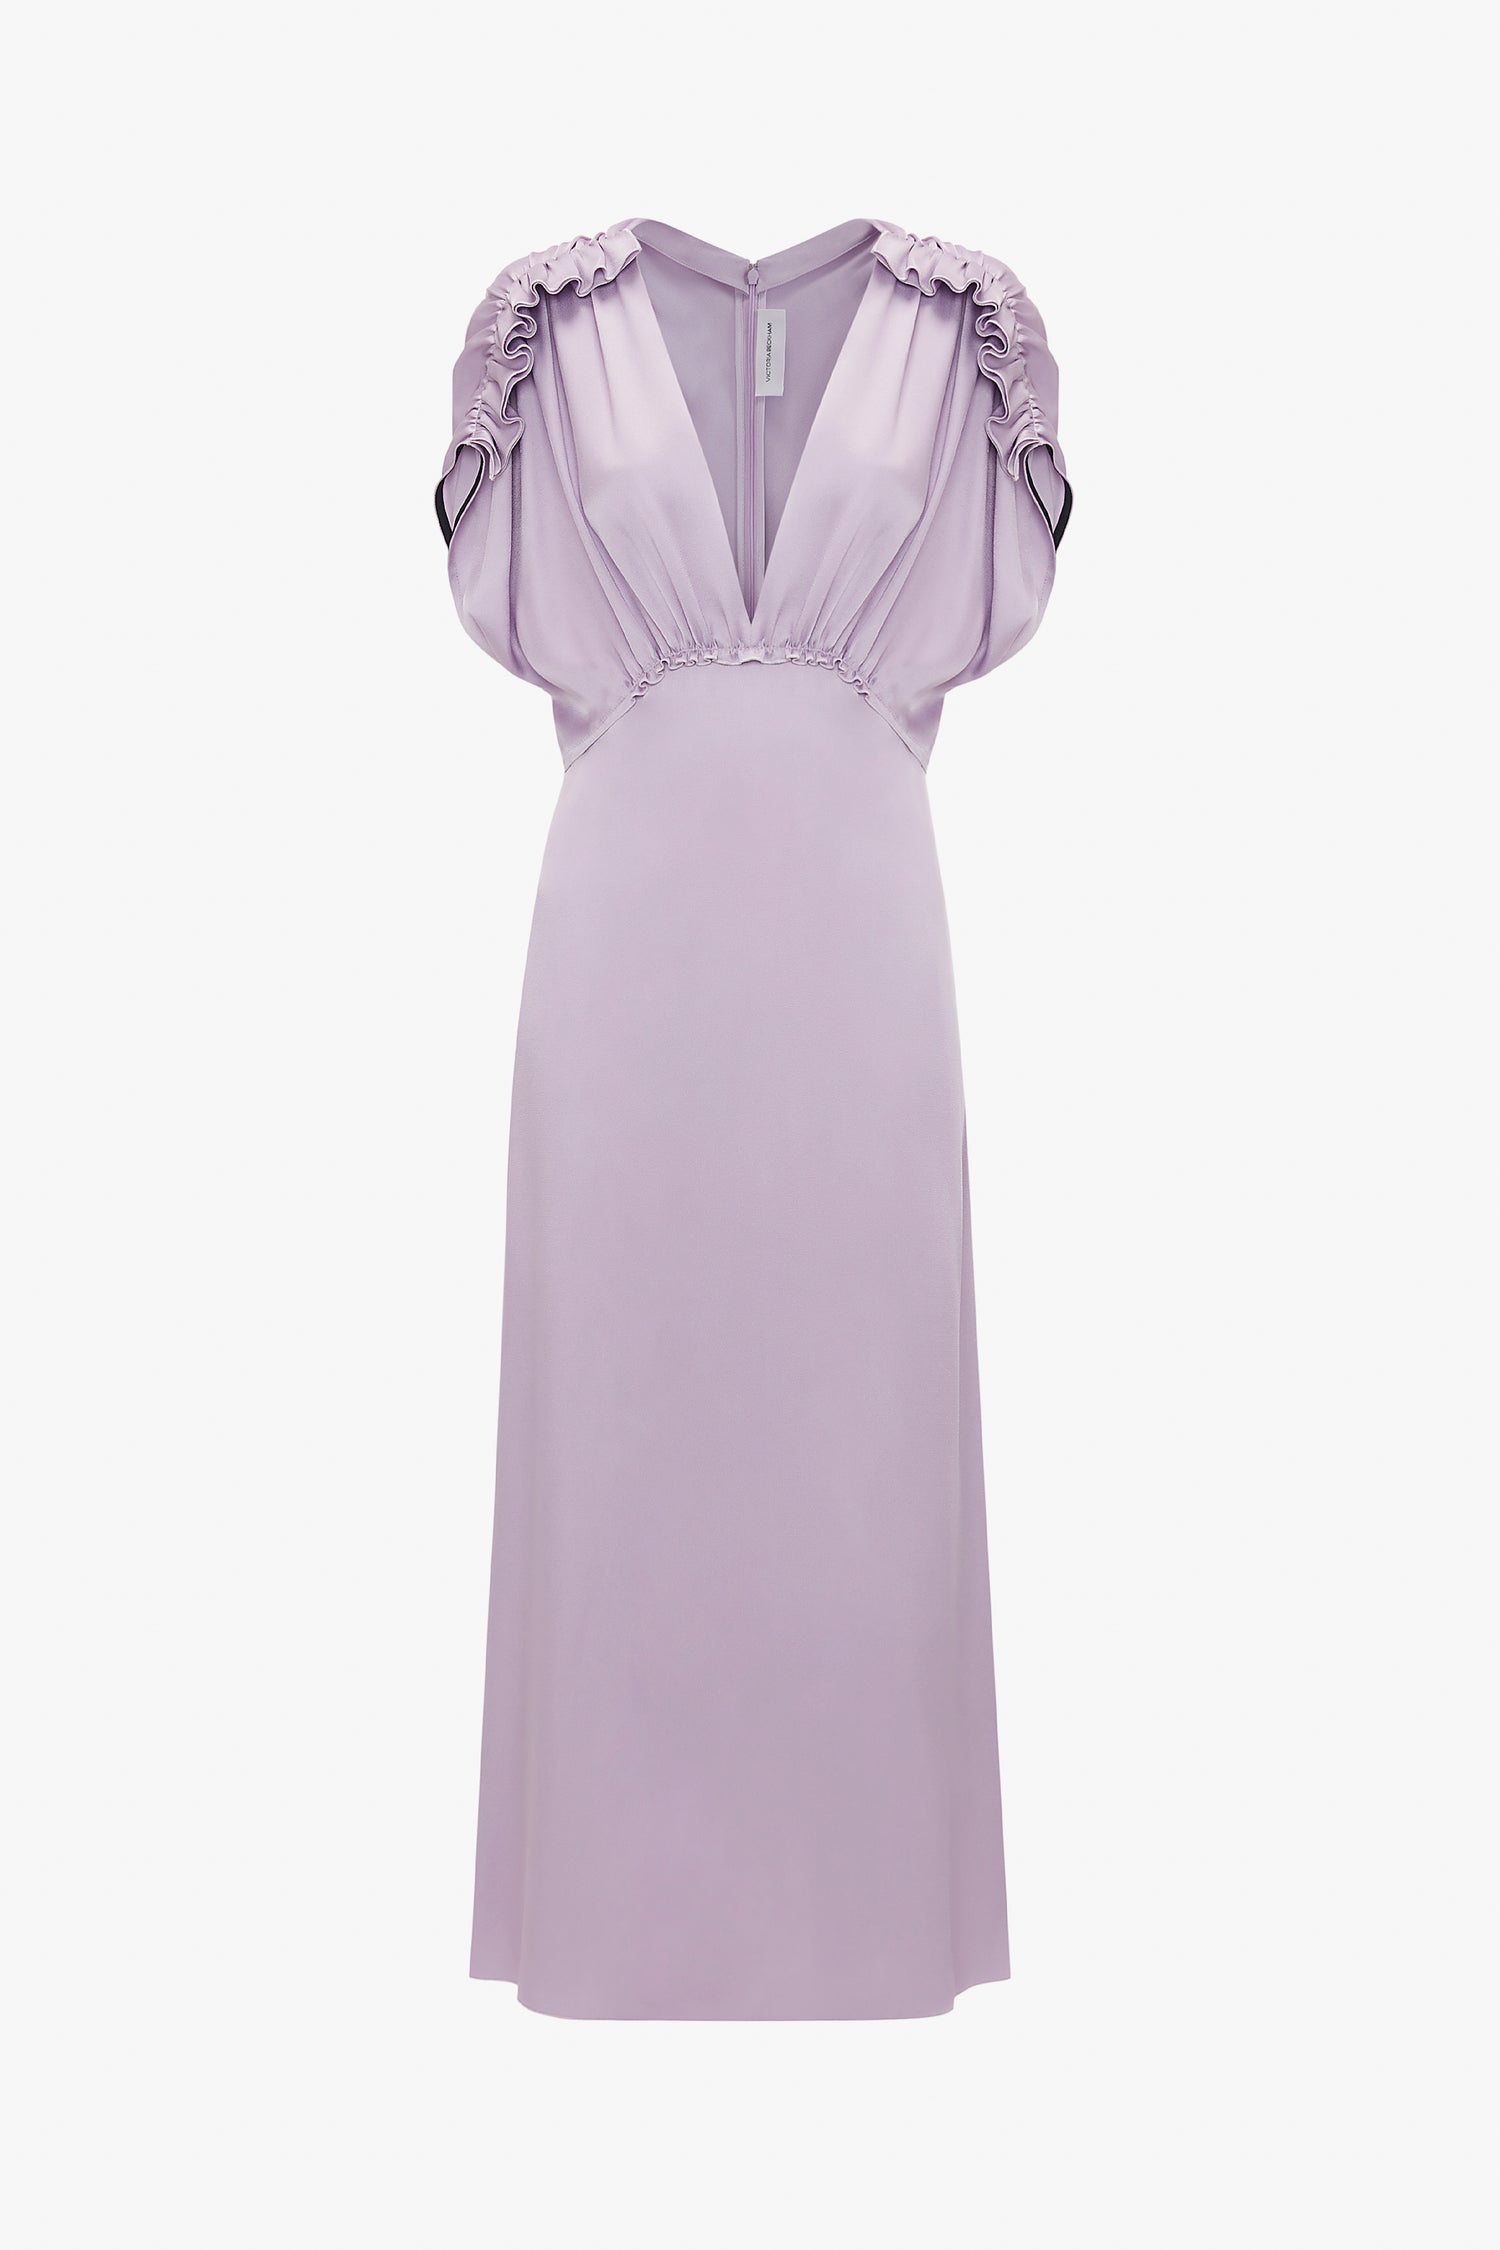 The Victoria Beckham V-Neck Ruffle Midi Dress In Petunia features a deep V-neckline, ruched sleeves, and a cinched waist, perfect for those seeking elegant dresses. Displayed on a white background, this lavender masterpiece exudes sophistication.